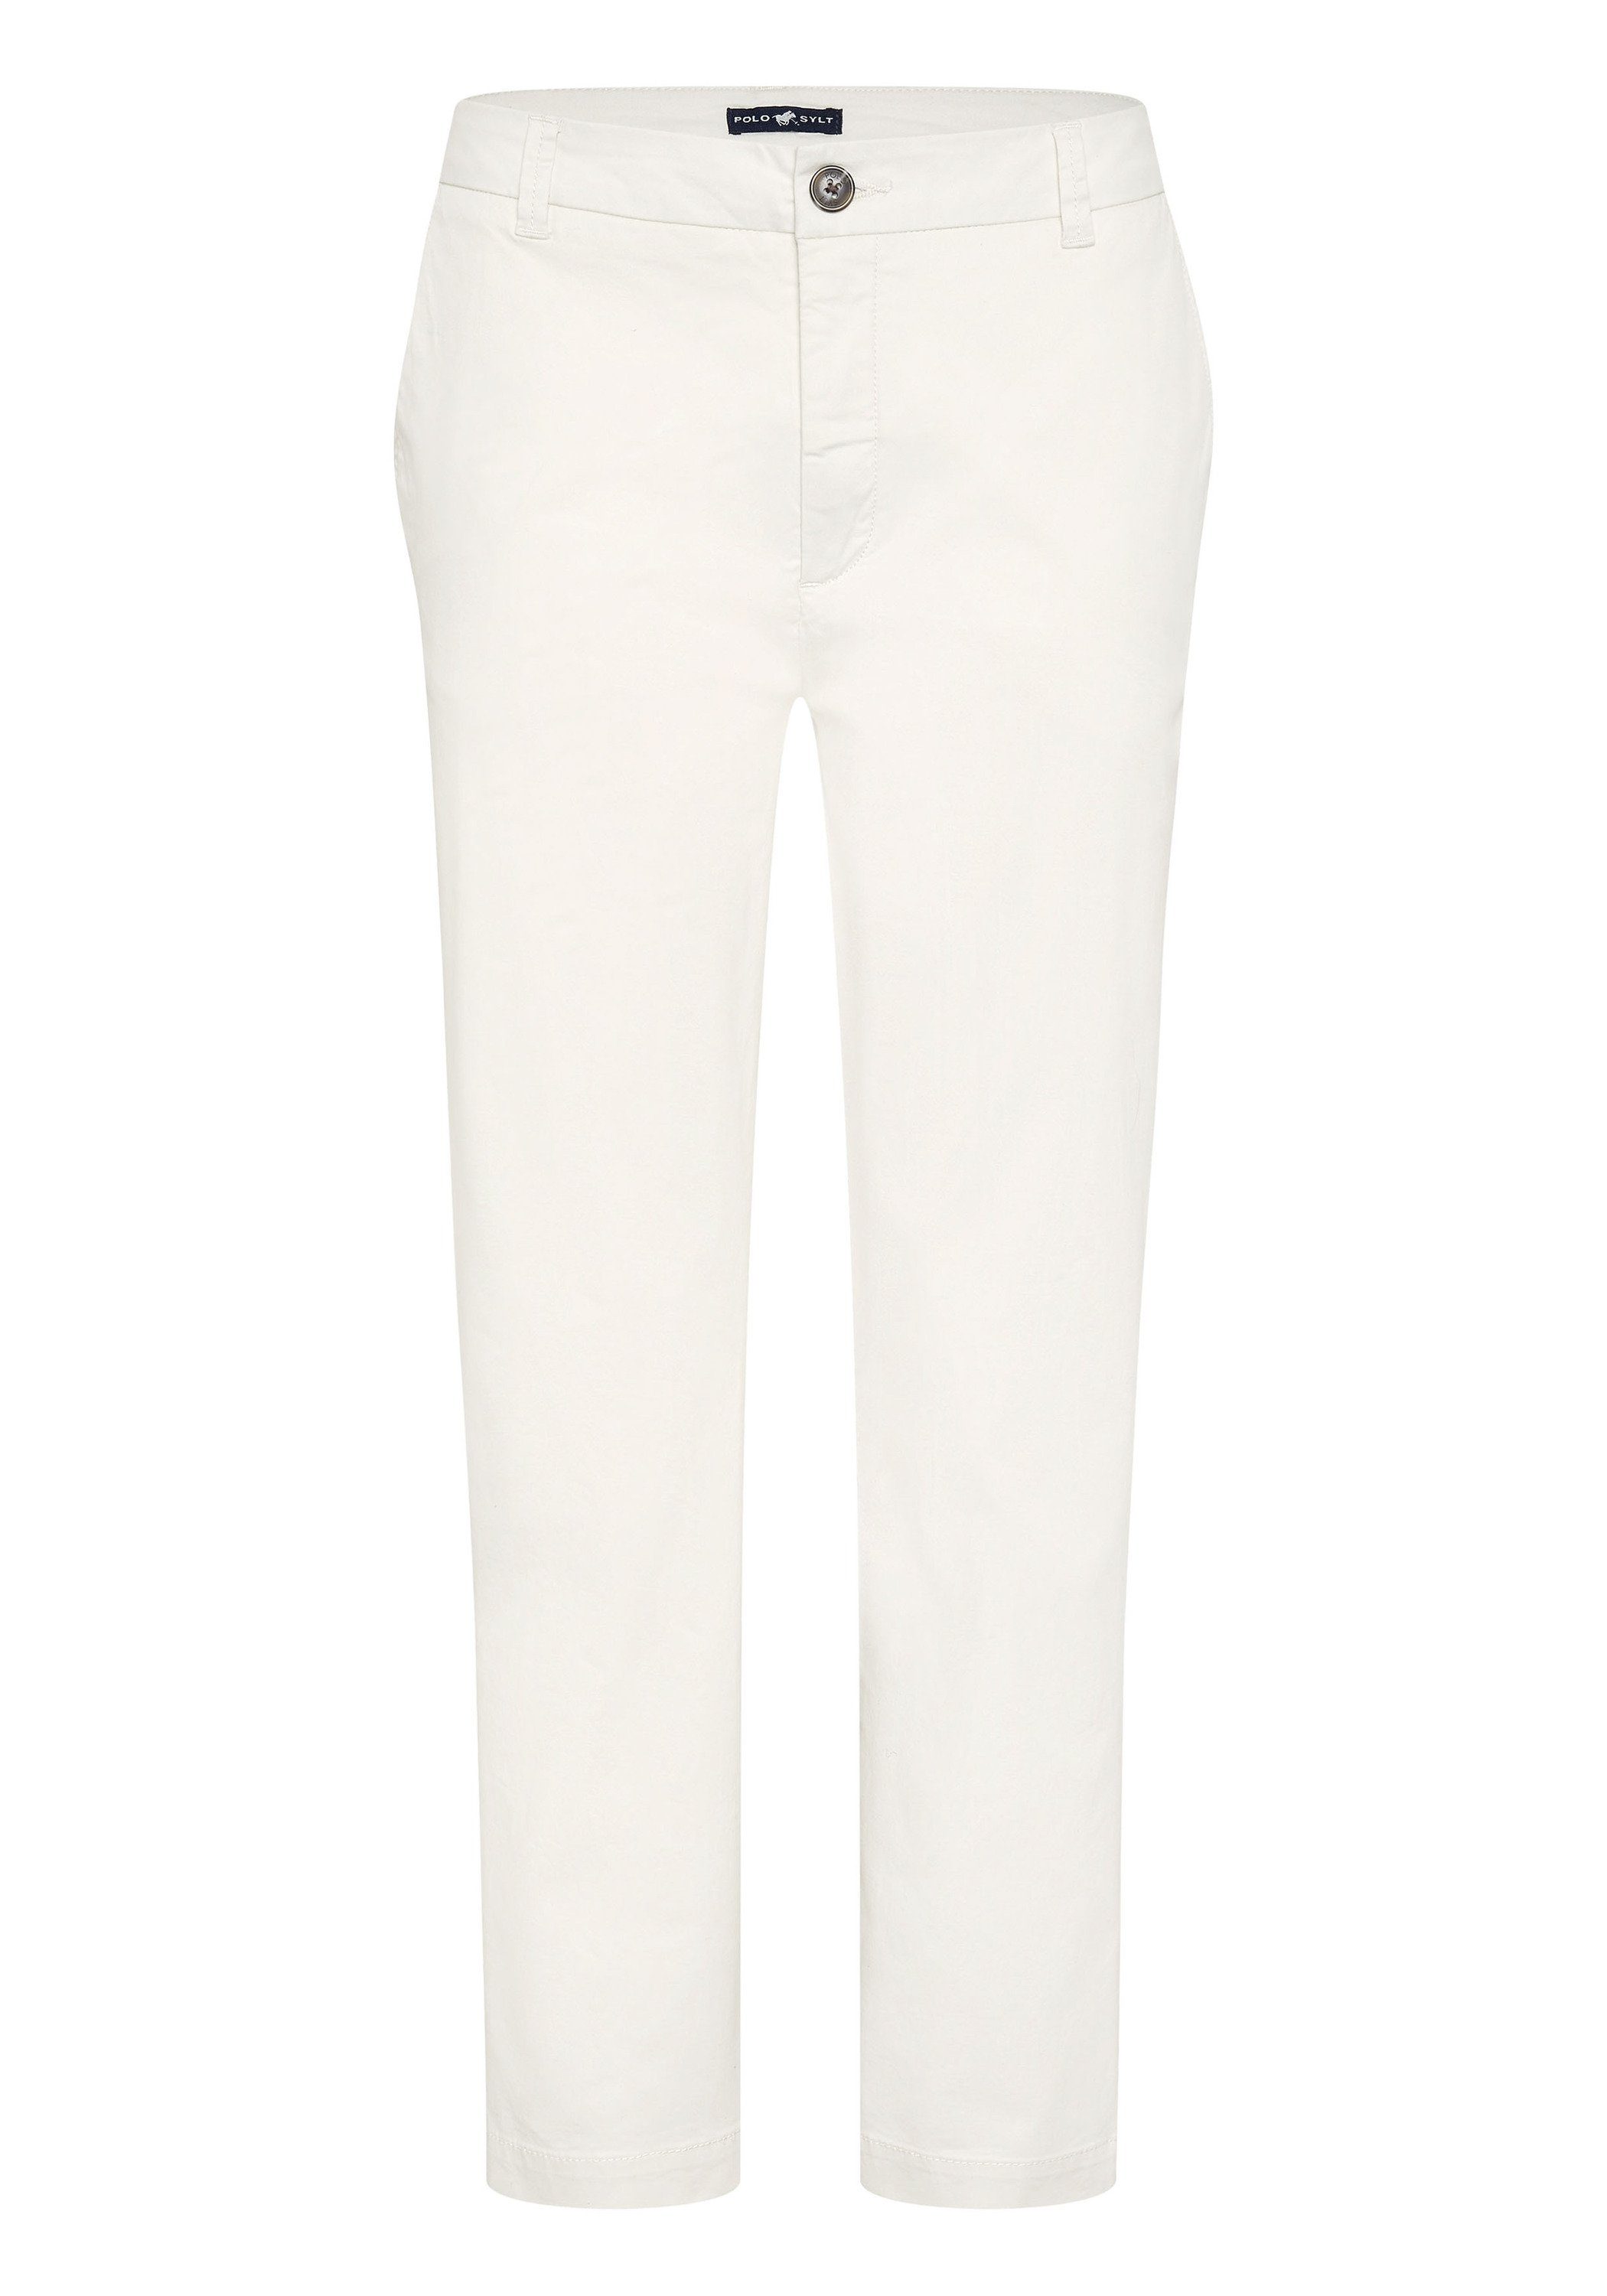 Polo Sylt Chinohose im cleanen 11-0701 Whisper White Look